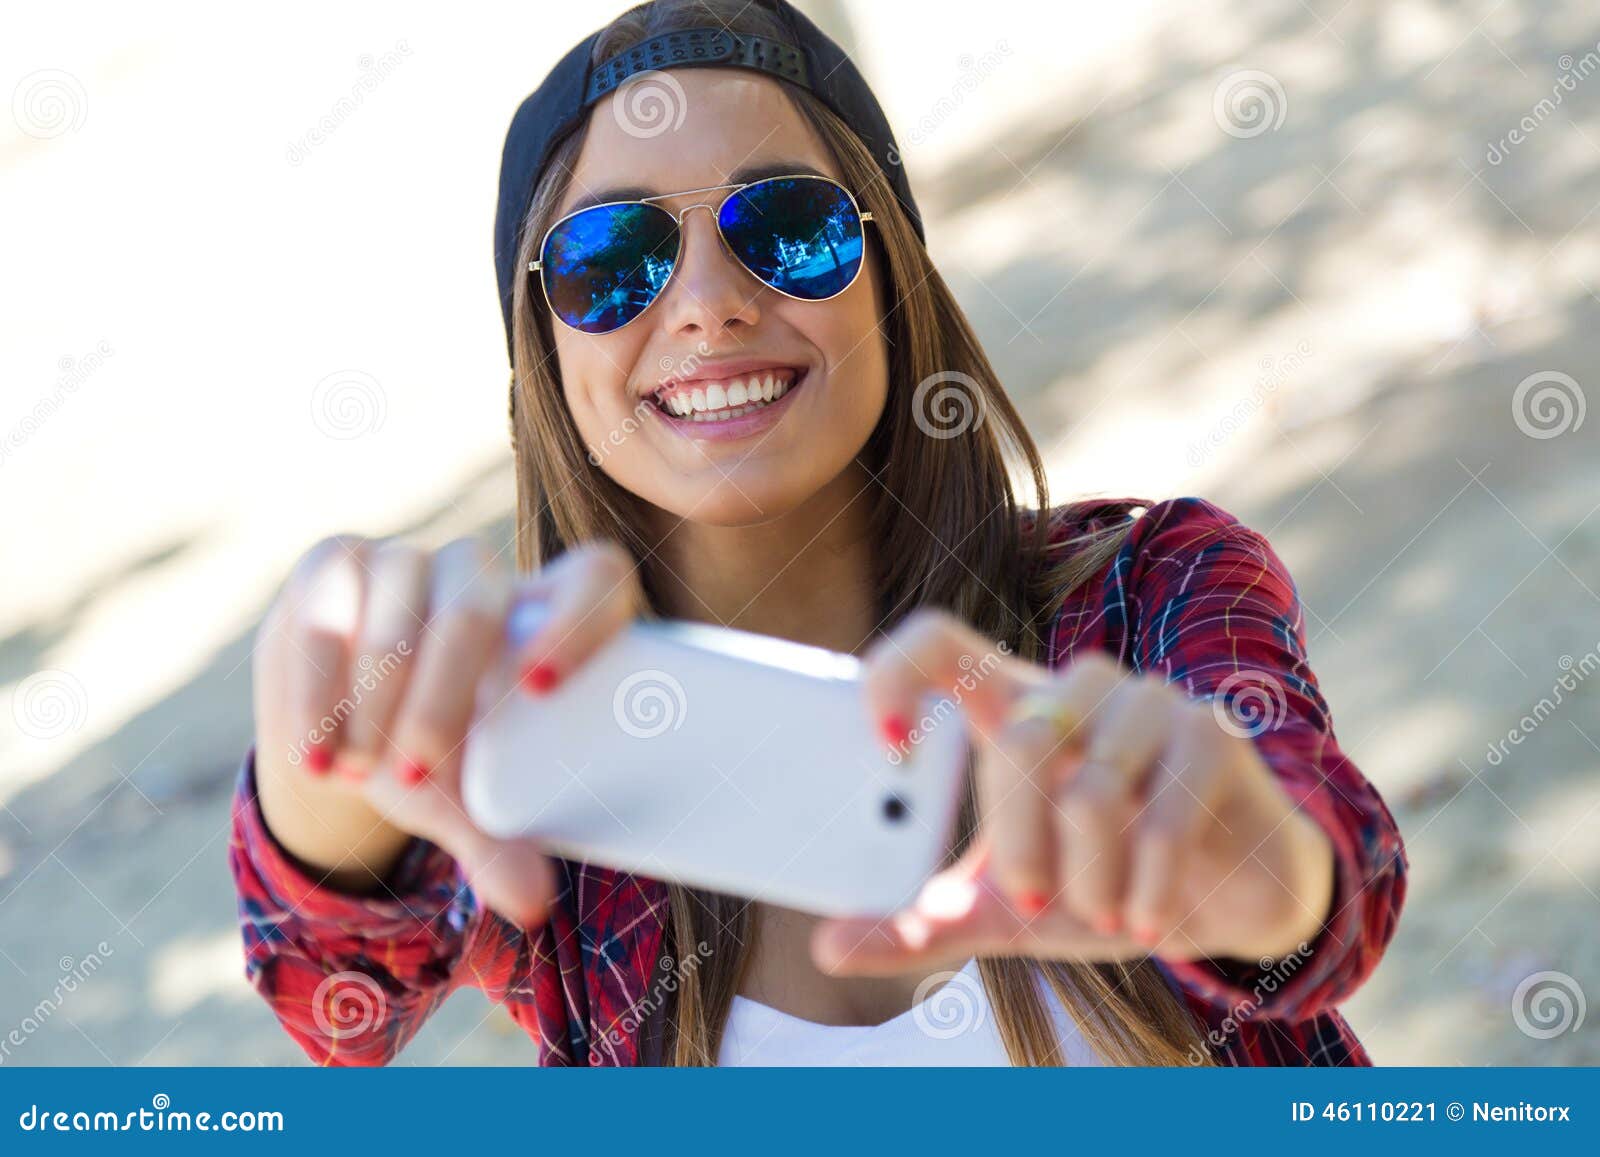 Portrait Of Beautiful Girl Taking A Selfie With Mobile Phone Stock Image Image Of Nature